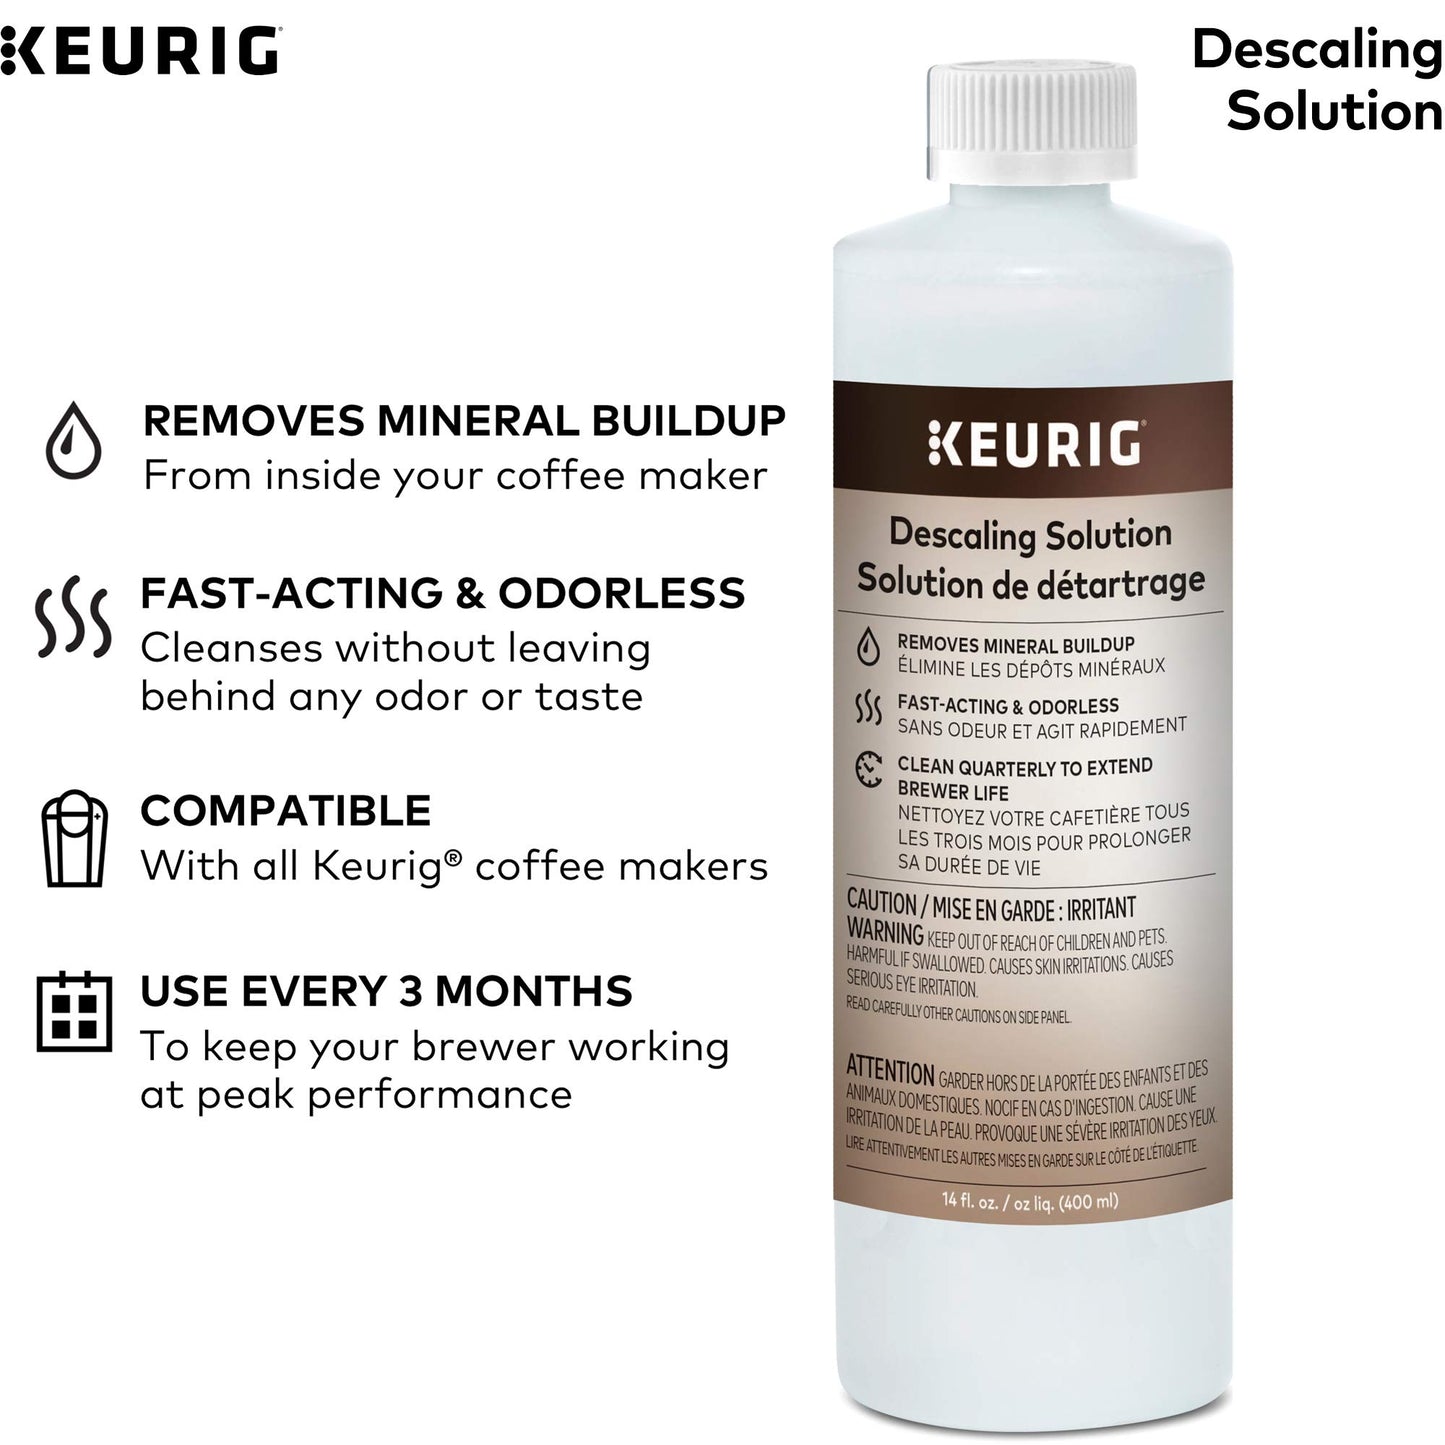 Keurig Brewer Cleanse Kit For Maintenance Includes Descaling Solution & Rinse Pods, Compatible with Keurig Classic/1.0 & 2.0 K-Cup Pod Coffee Makers, 4 Count